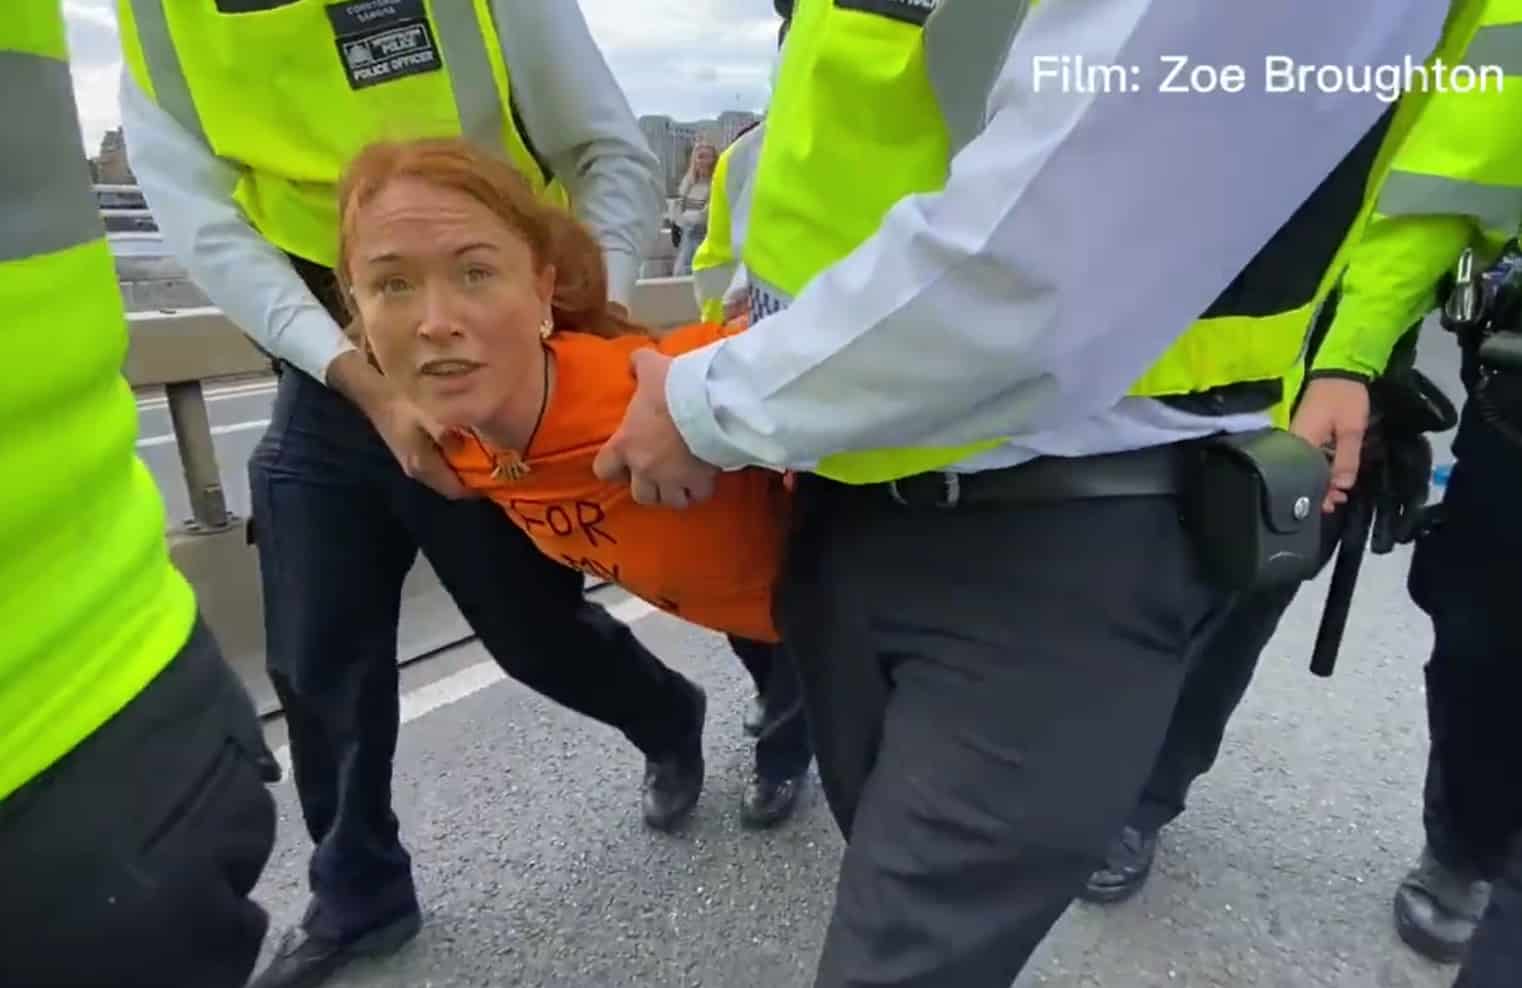 ‘I’m doing this for my son’: Climate protester gives interview while being carried away by police